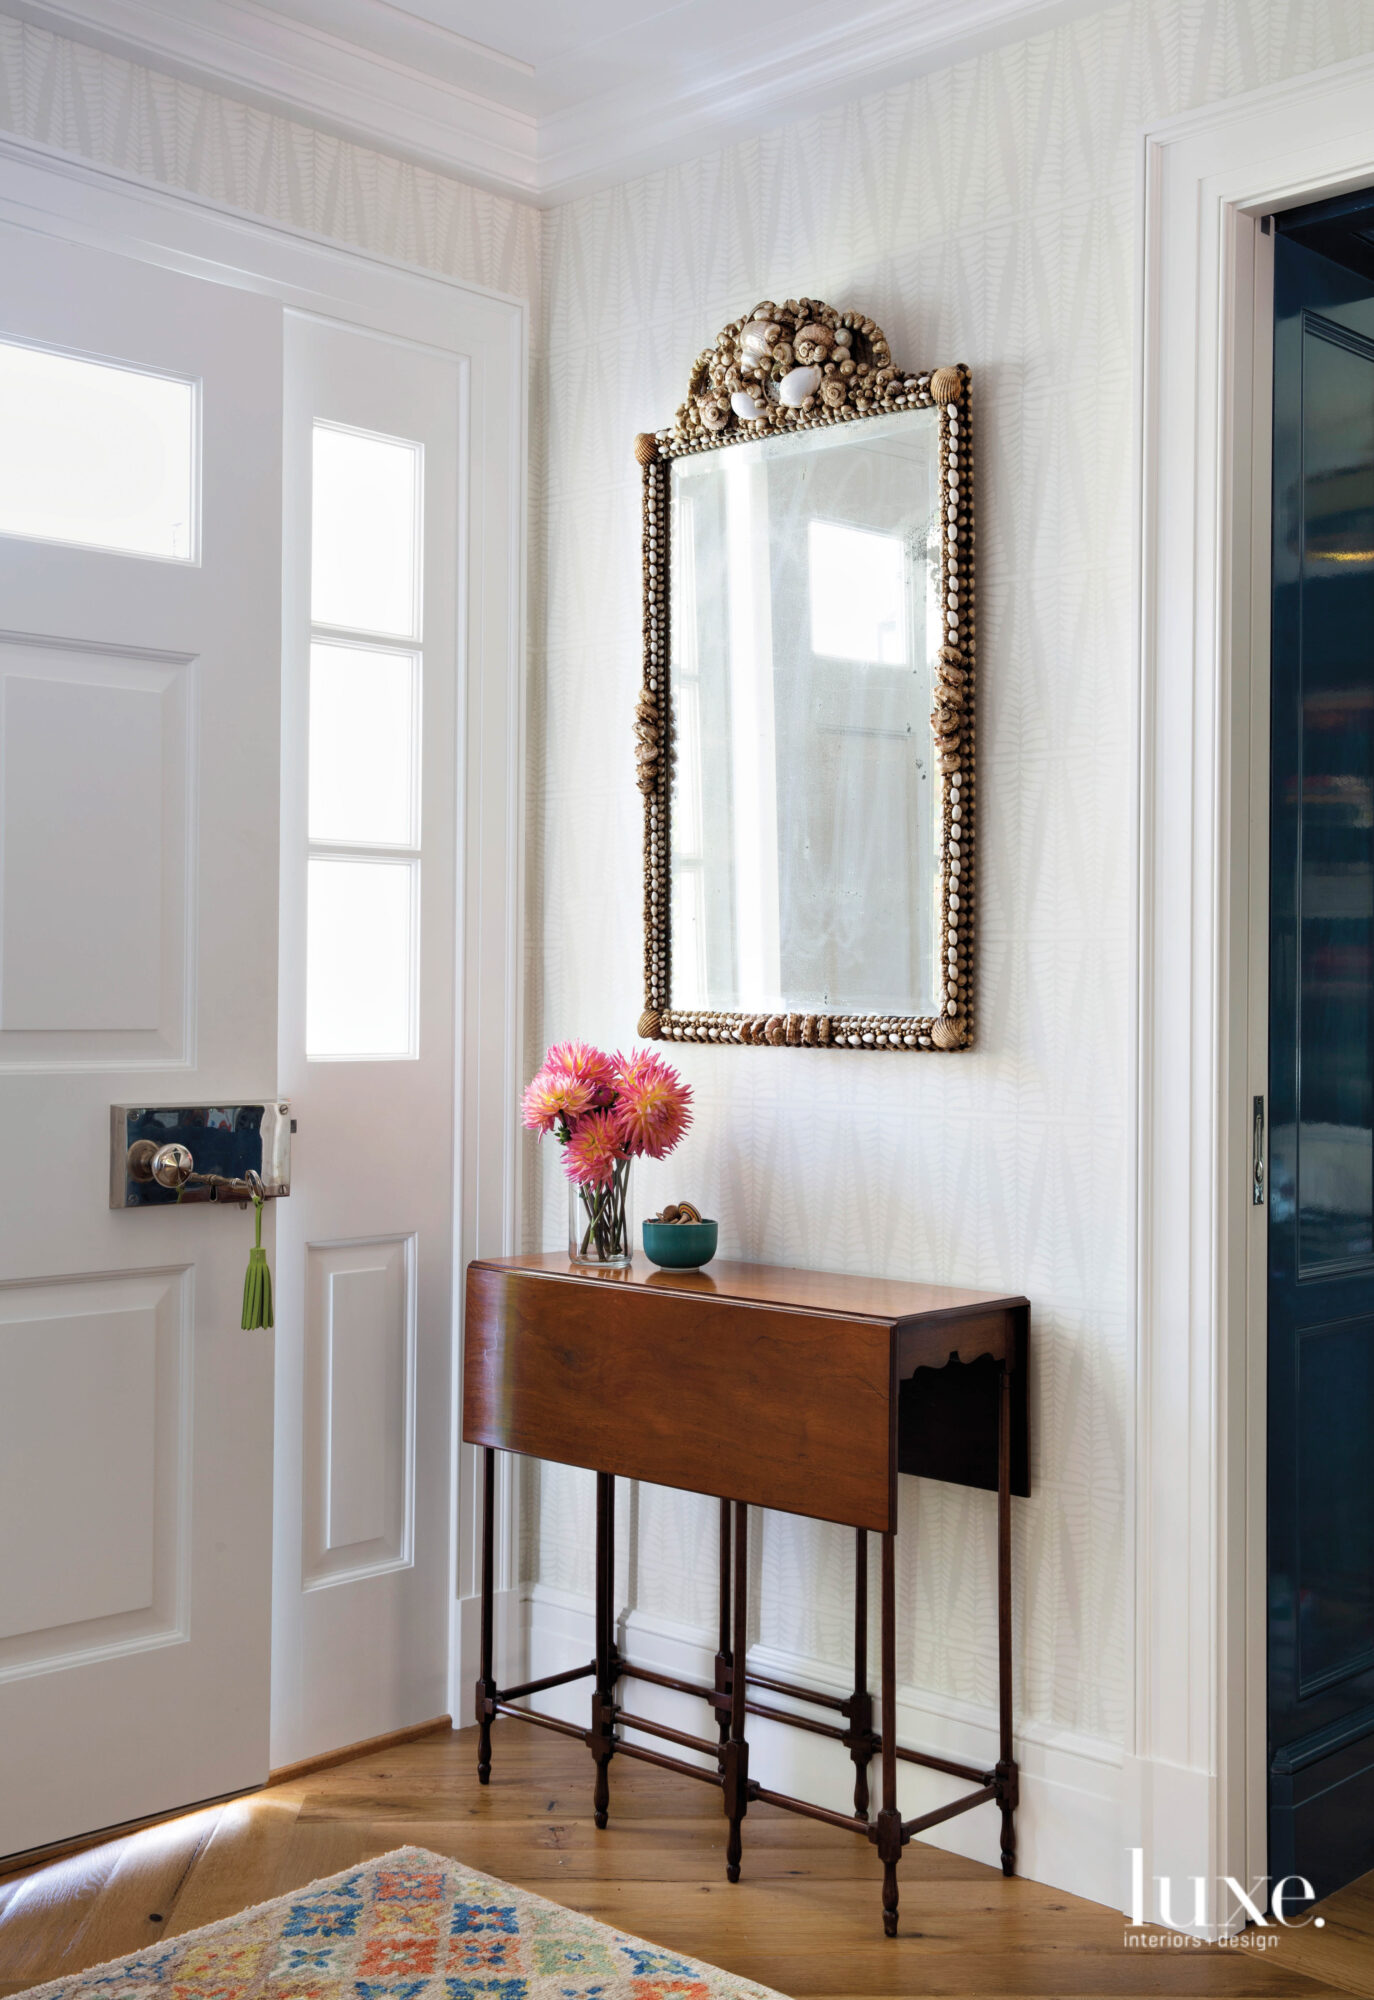 In the entry, a shell-studded mirror hangs above a small wooden table.